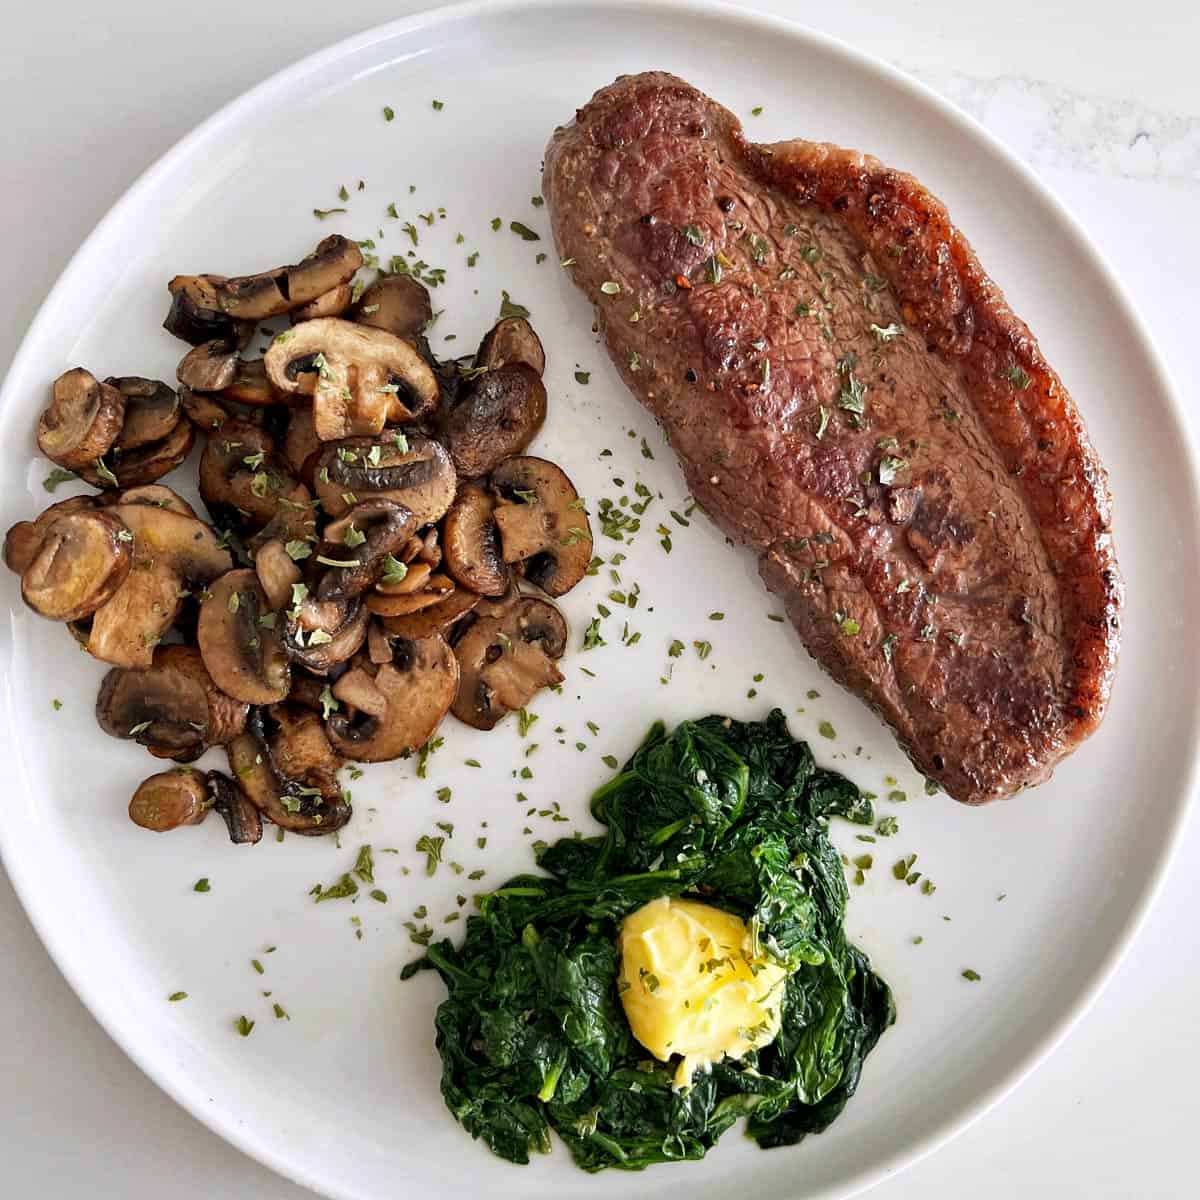 Picanha steak is served with sauteed mushrooms and sauteed spinach.